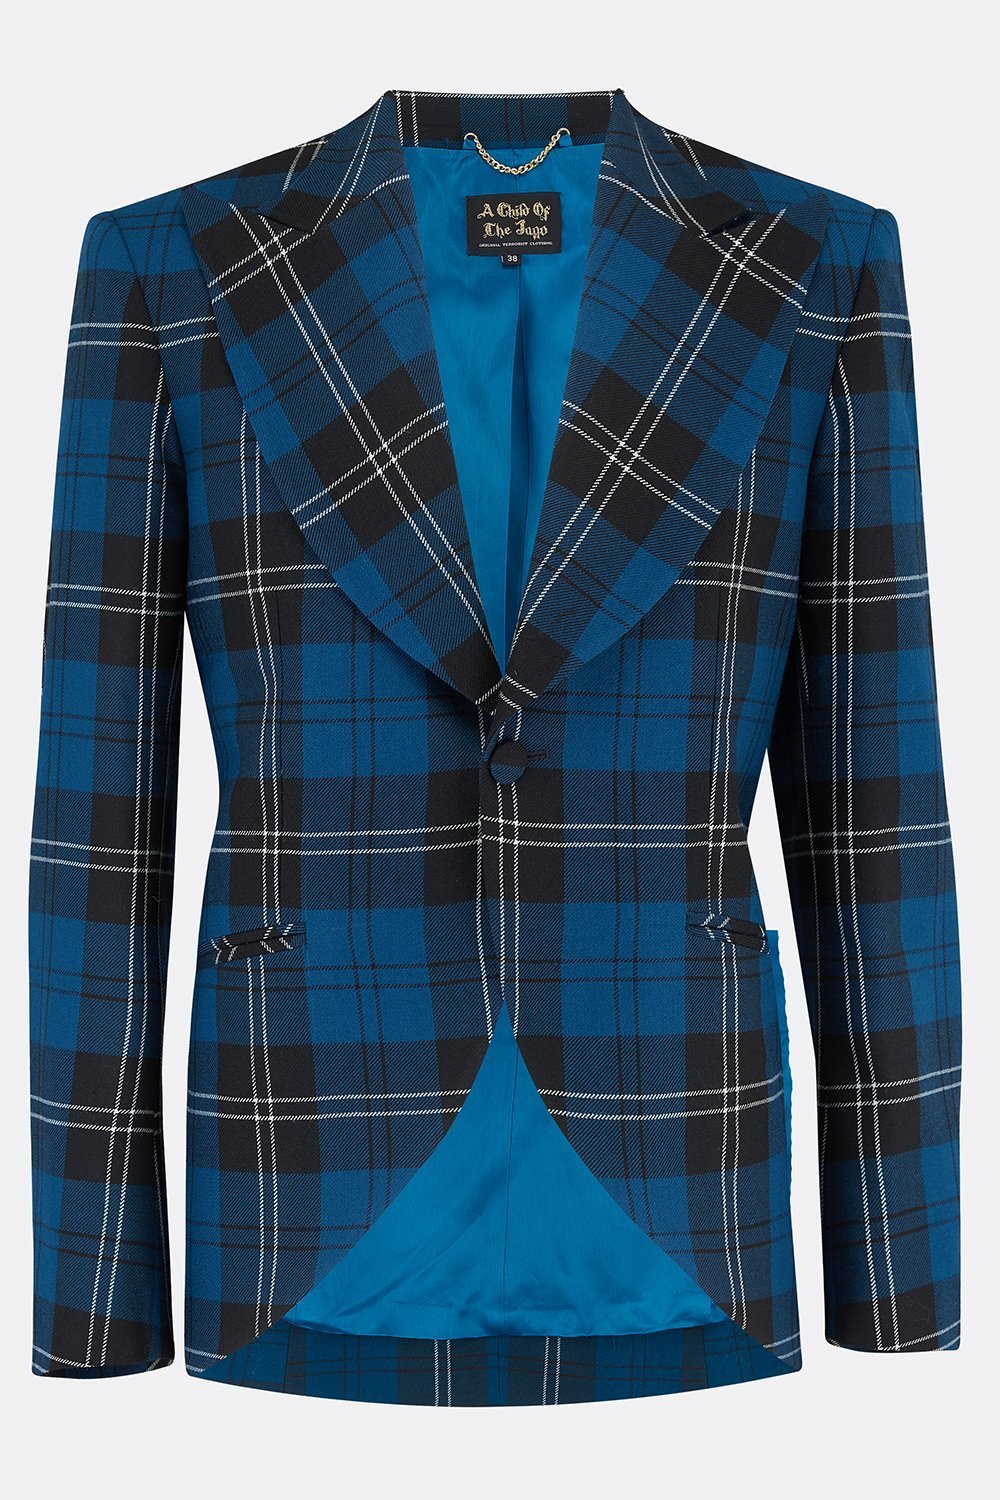 LEYBOURNE JACKET IN BLUE CHECK (made to order)-menswear-A Child Of The Jago